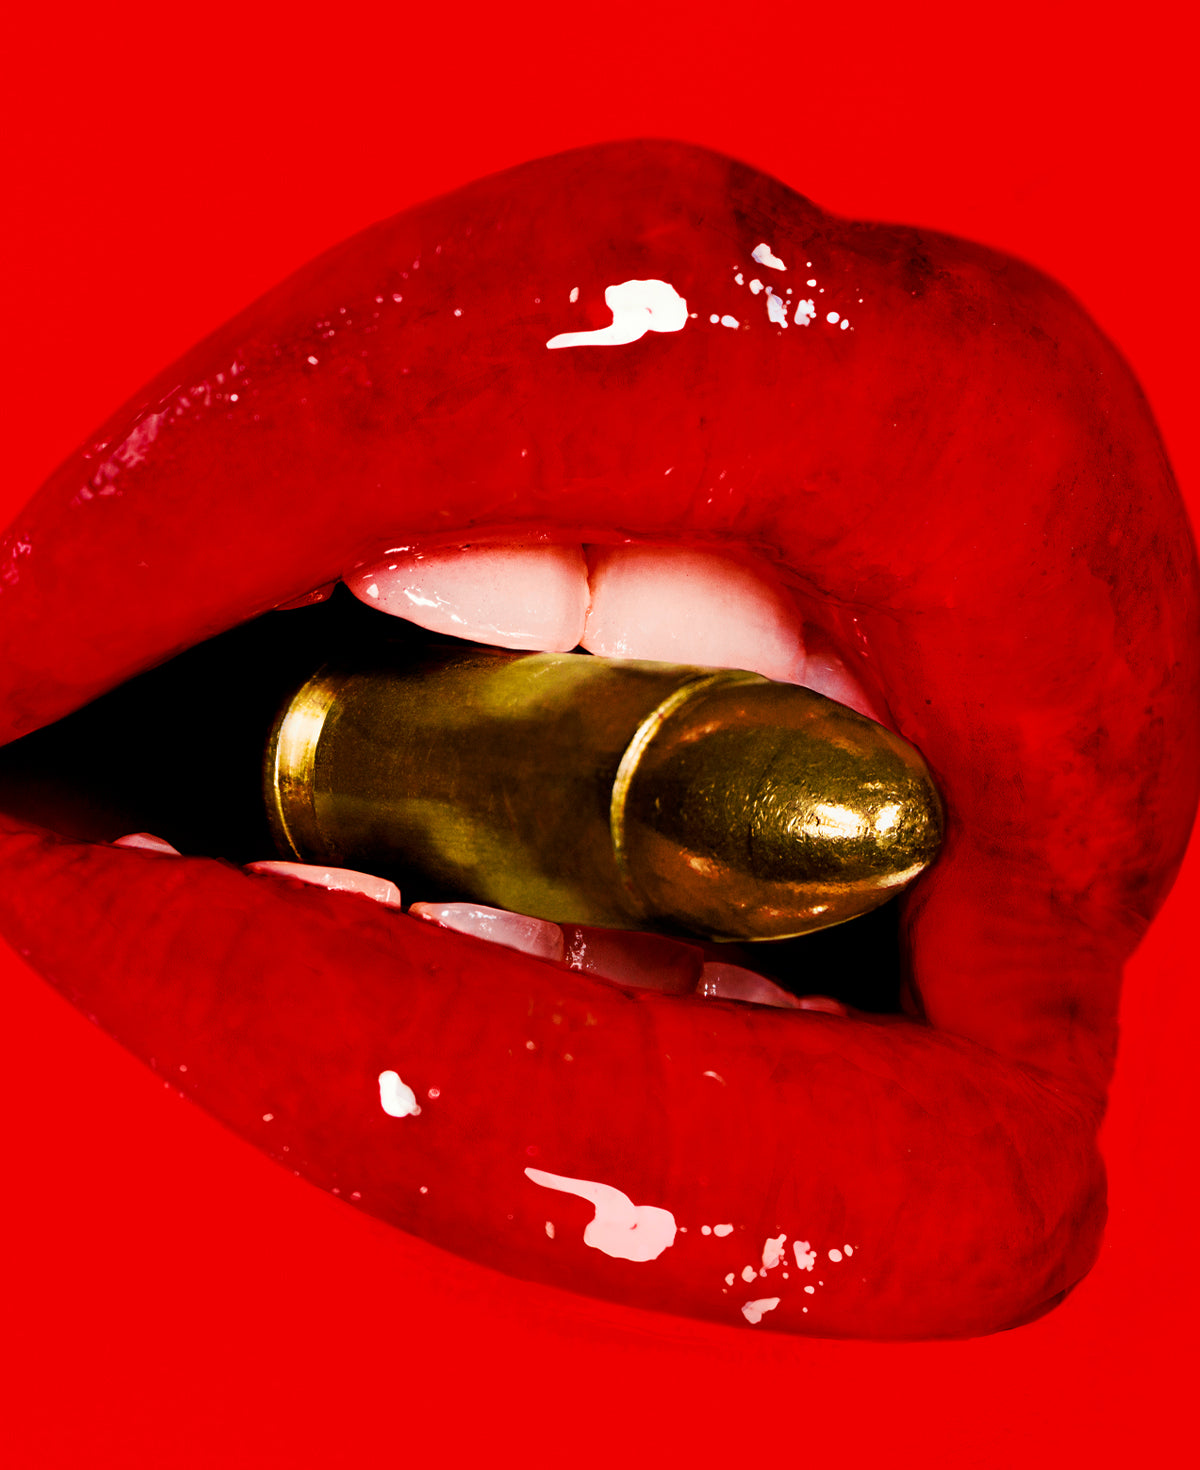 BULLETPROOF (RED) / POP ART / Limited Editions from €200,- Worldwide sh